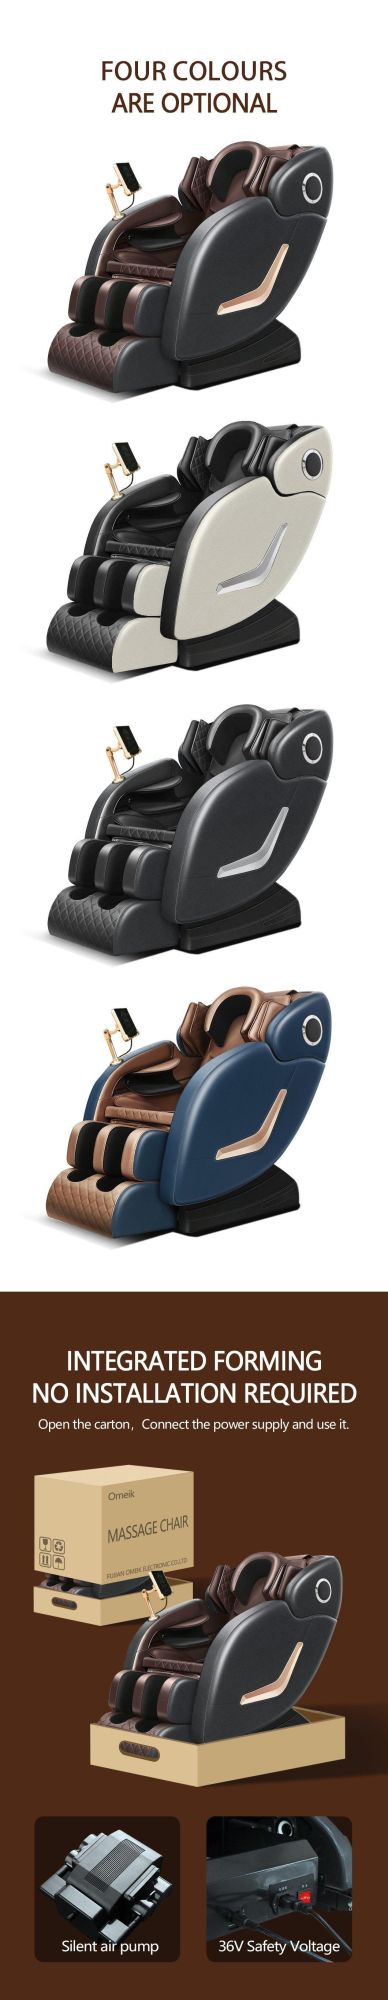 Smart Luxury Pedicure Full Body Thai Strech Electric Automatic Sofa Massage Chair for Home and Office